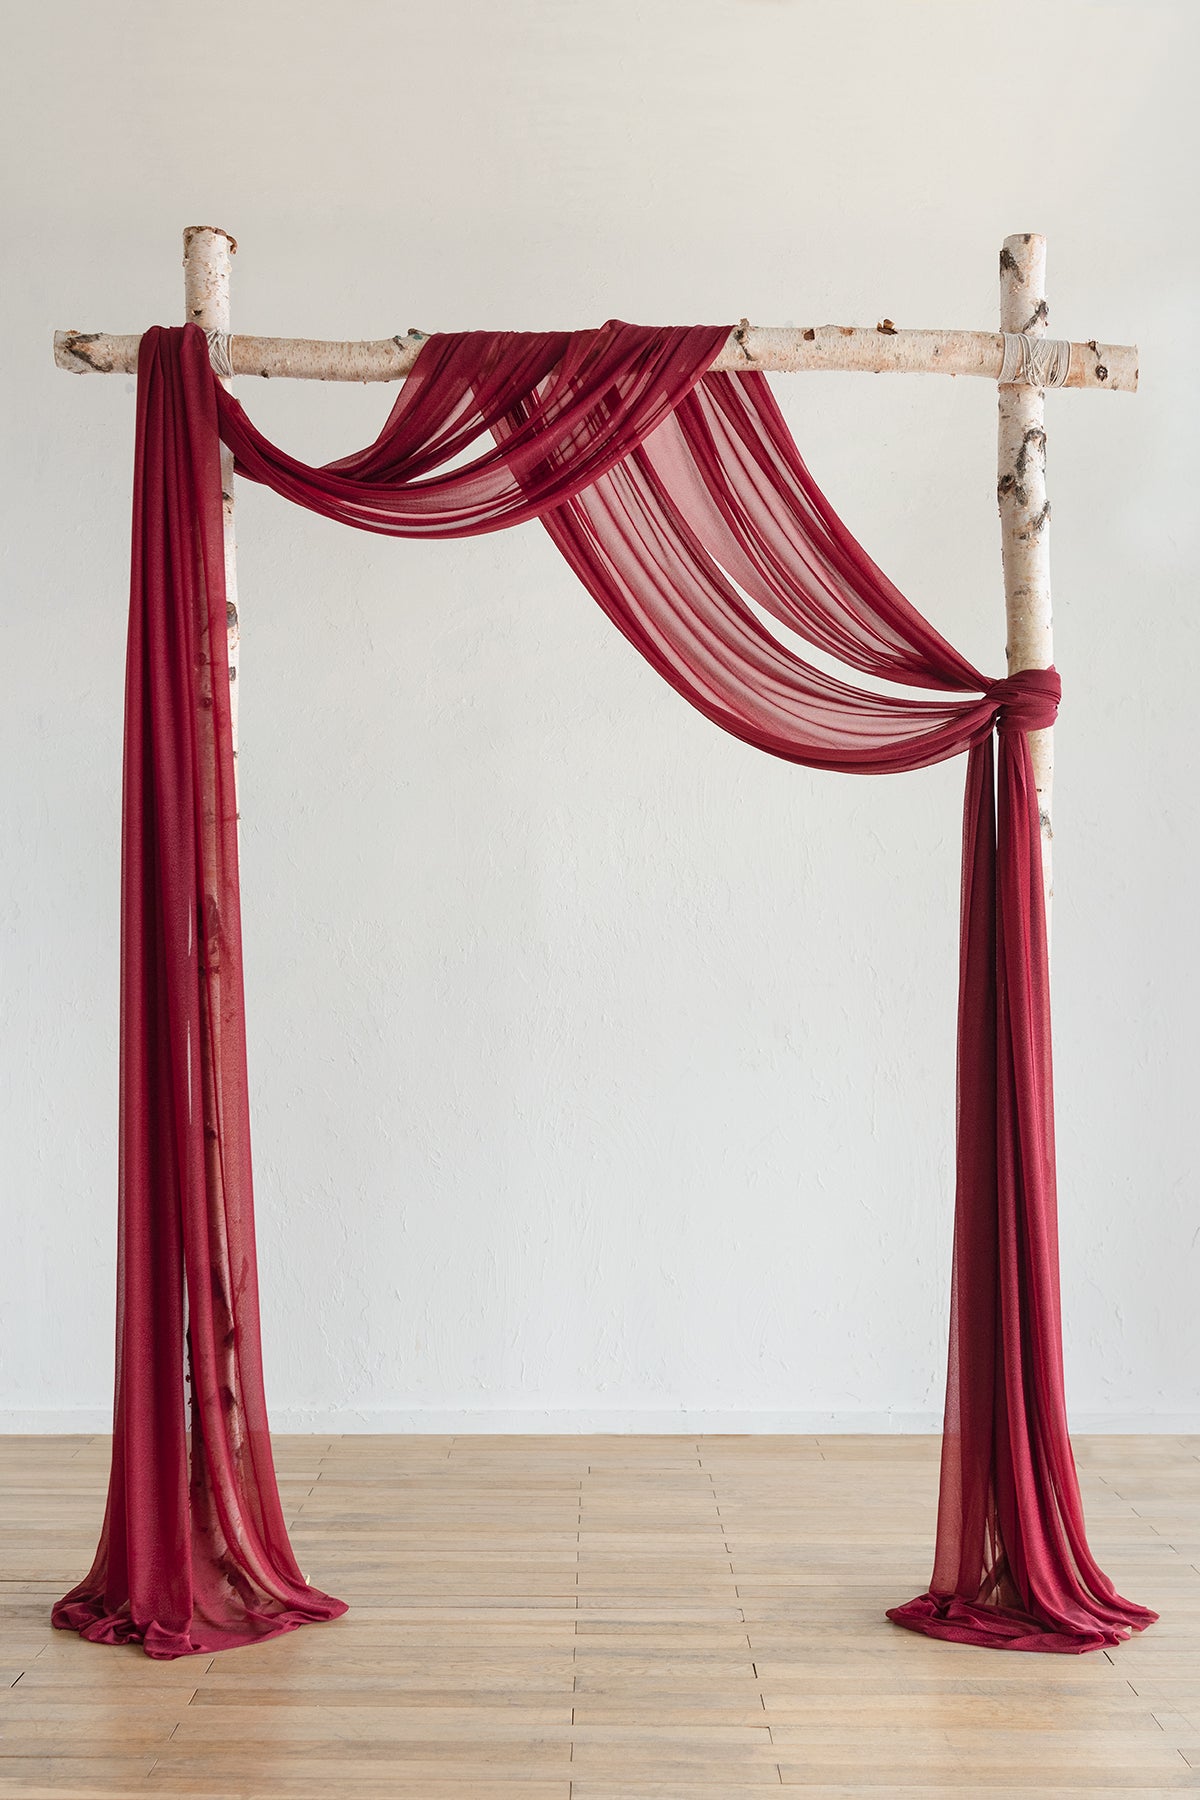 Ling's Moment 2 Panels 20ft Red Wedding Arch Chiffon Draping Fabric, Sheer Hanging Drapes Arrangement for Wedding Ceremony Reception Backdrop